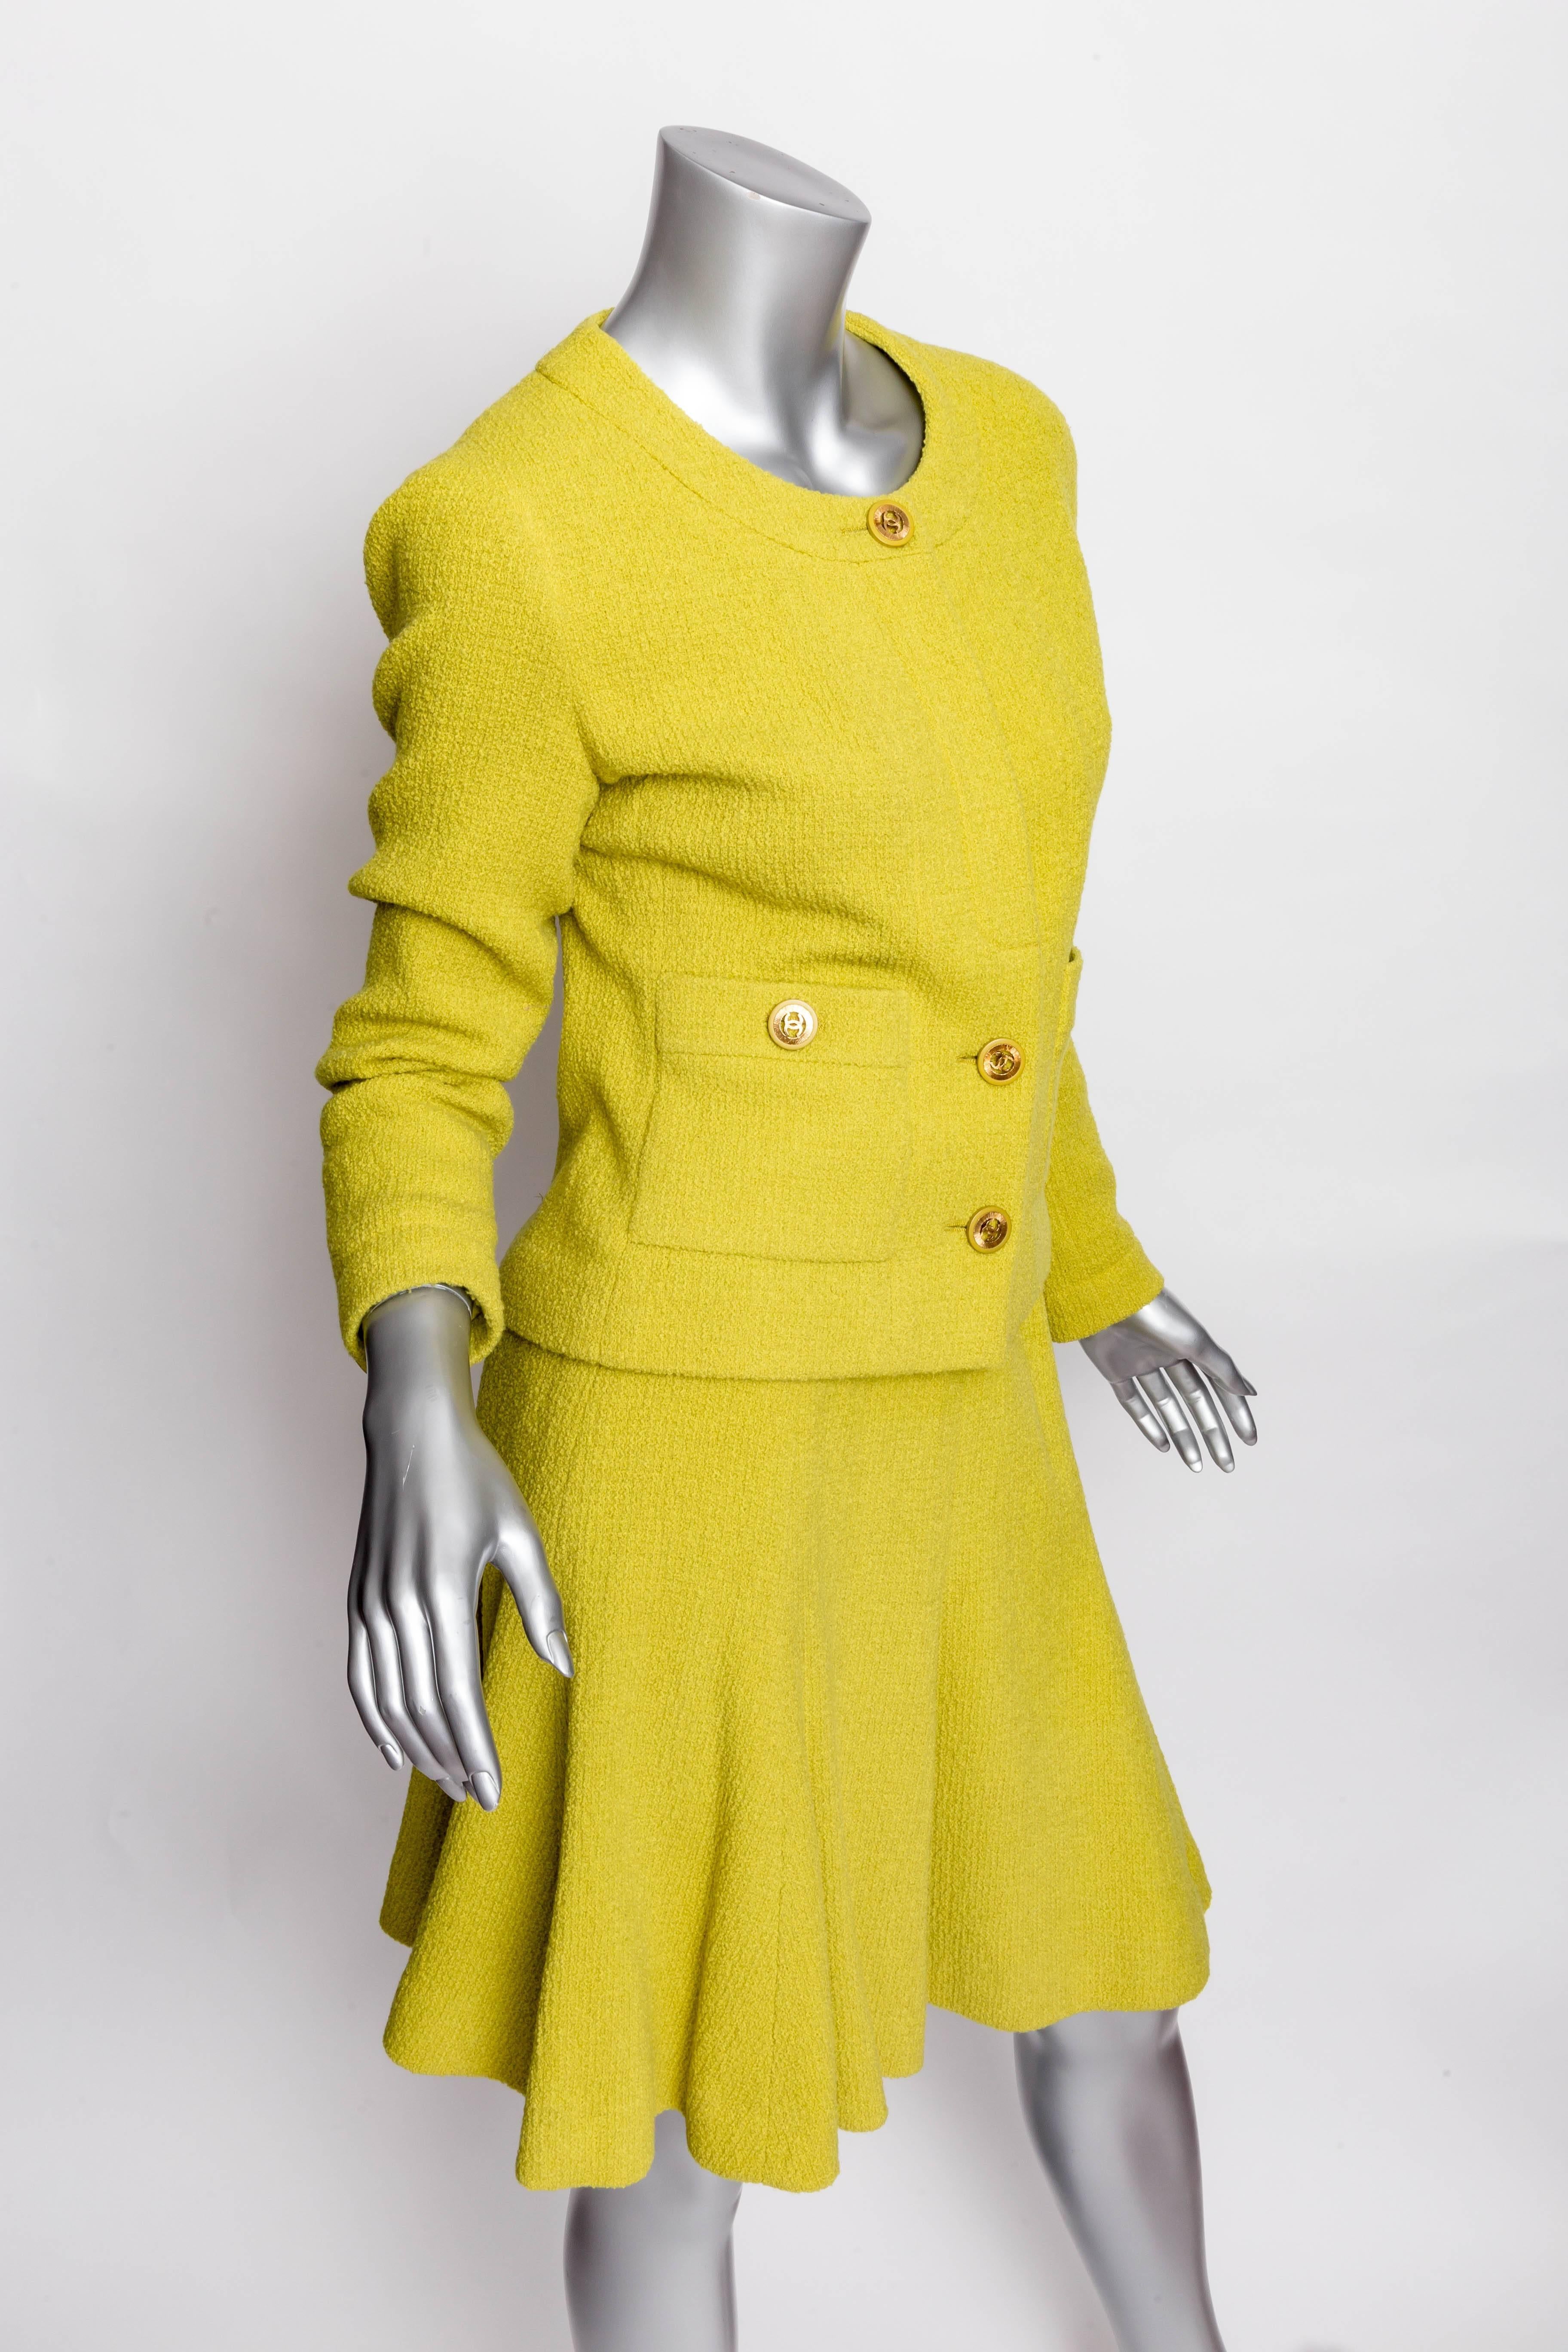 Yellow Chanel Skirt Suit - Size 36